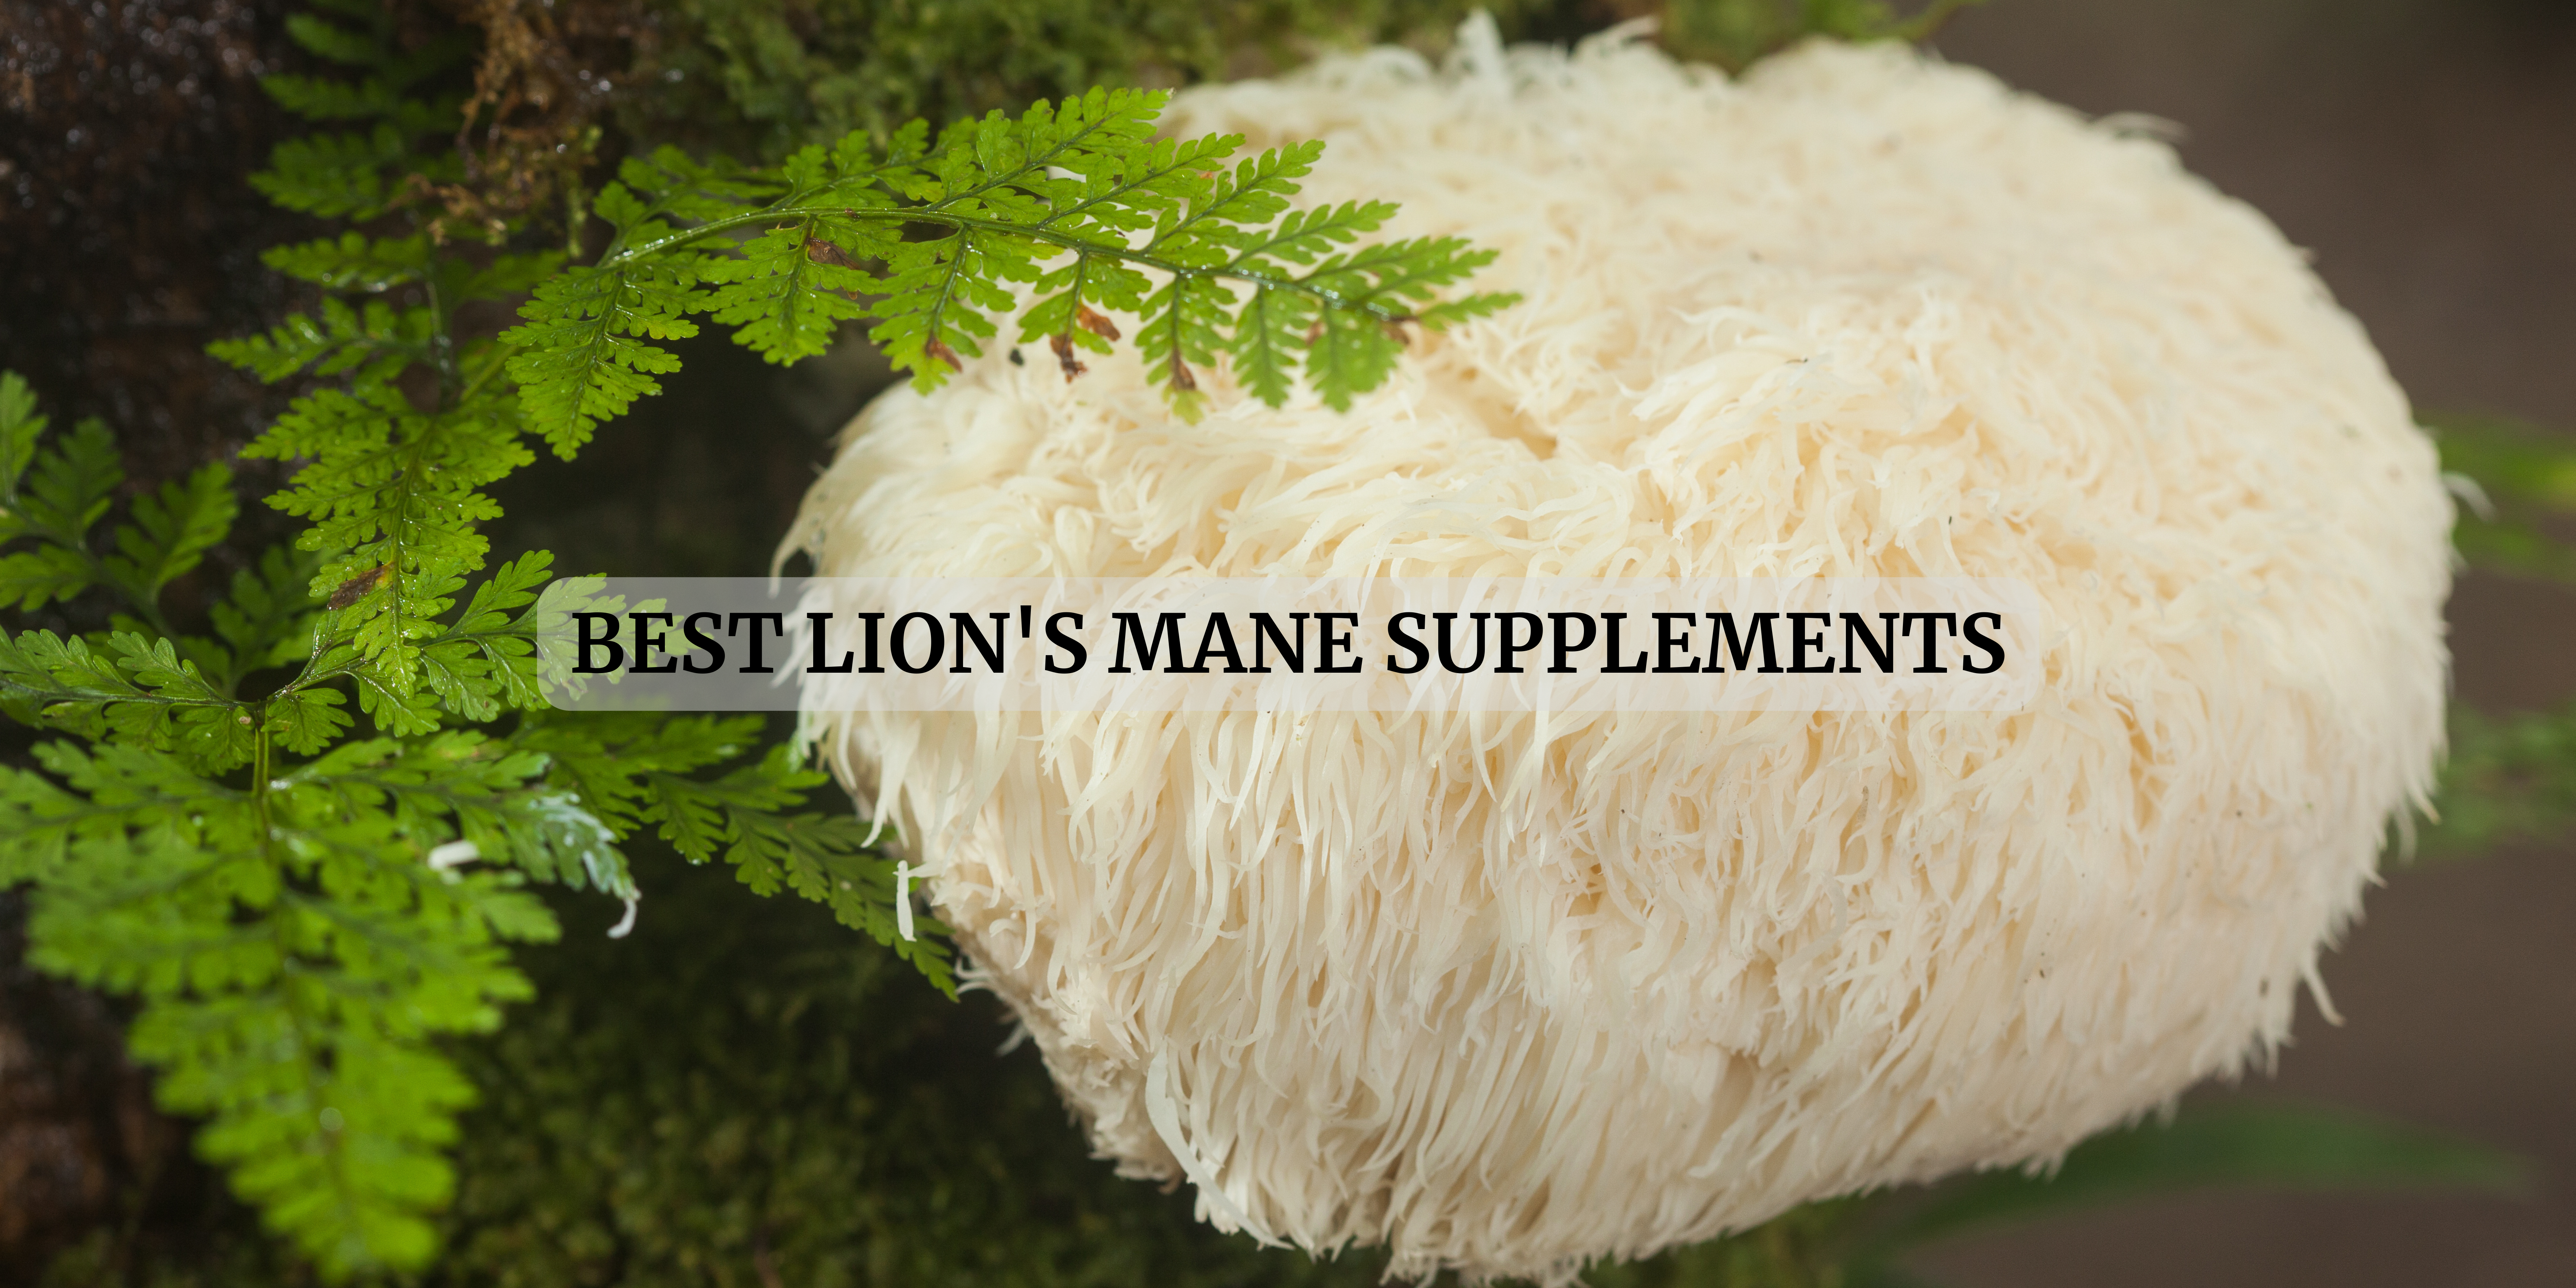 lion's mane supplements in Singapore